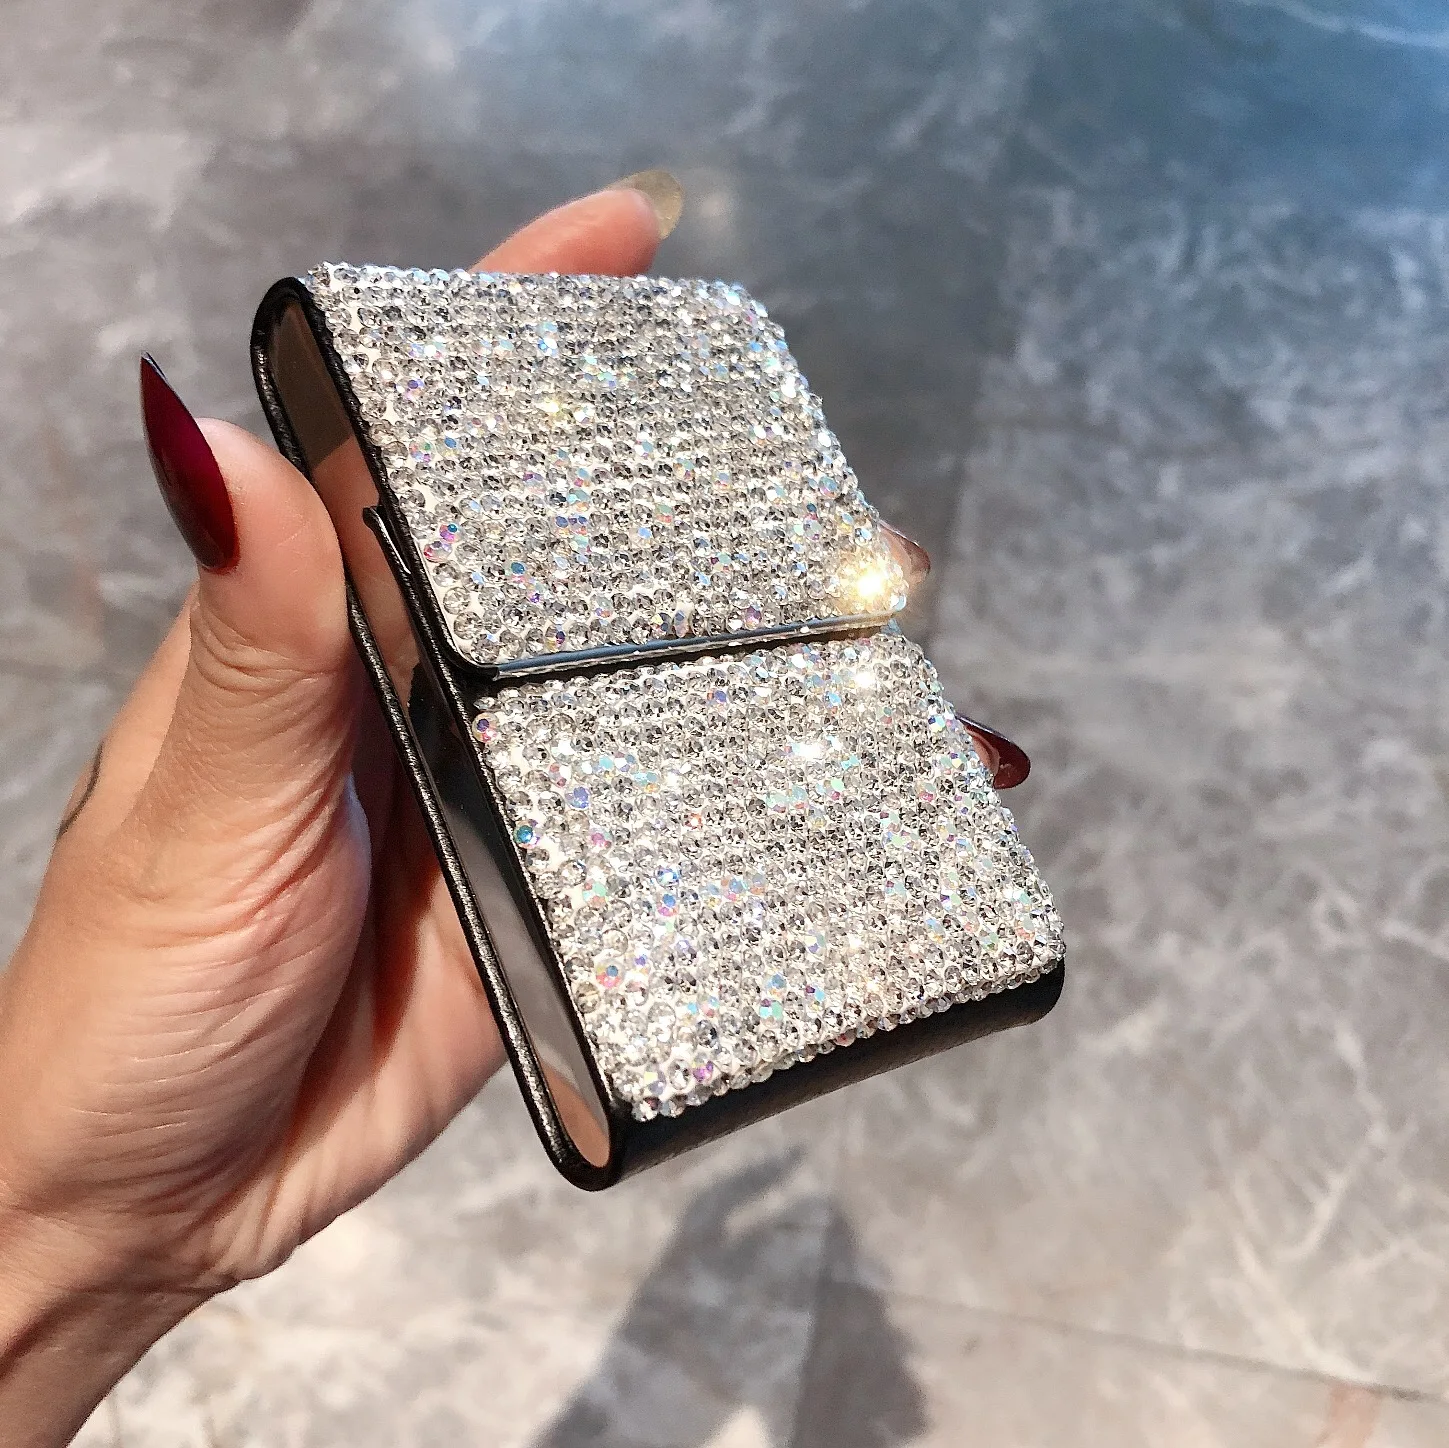 Cigarette Case For Women With Crystal And Black Leather Back Smoking Case Box Cigarette Holder Tobacco Box Silm enlarge